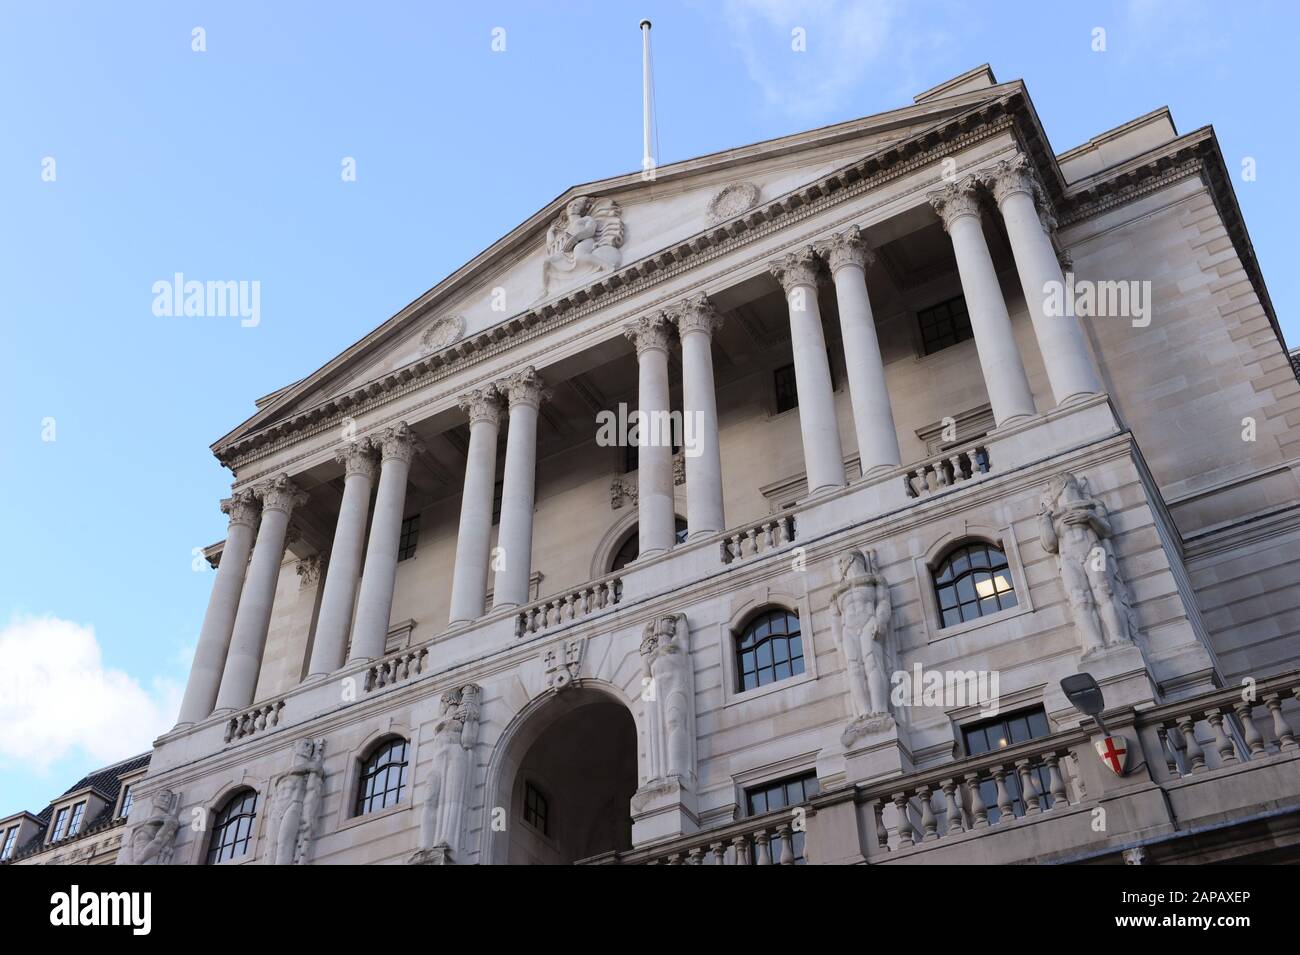 The Bank of England building on Threadneedle Street in London, England Stock Photo